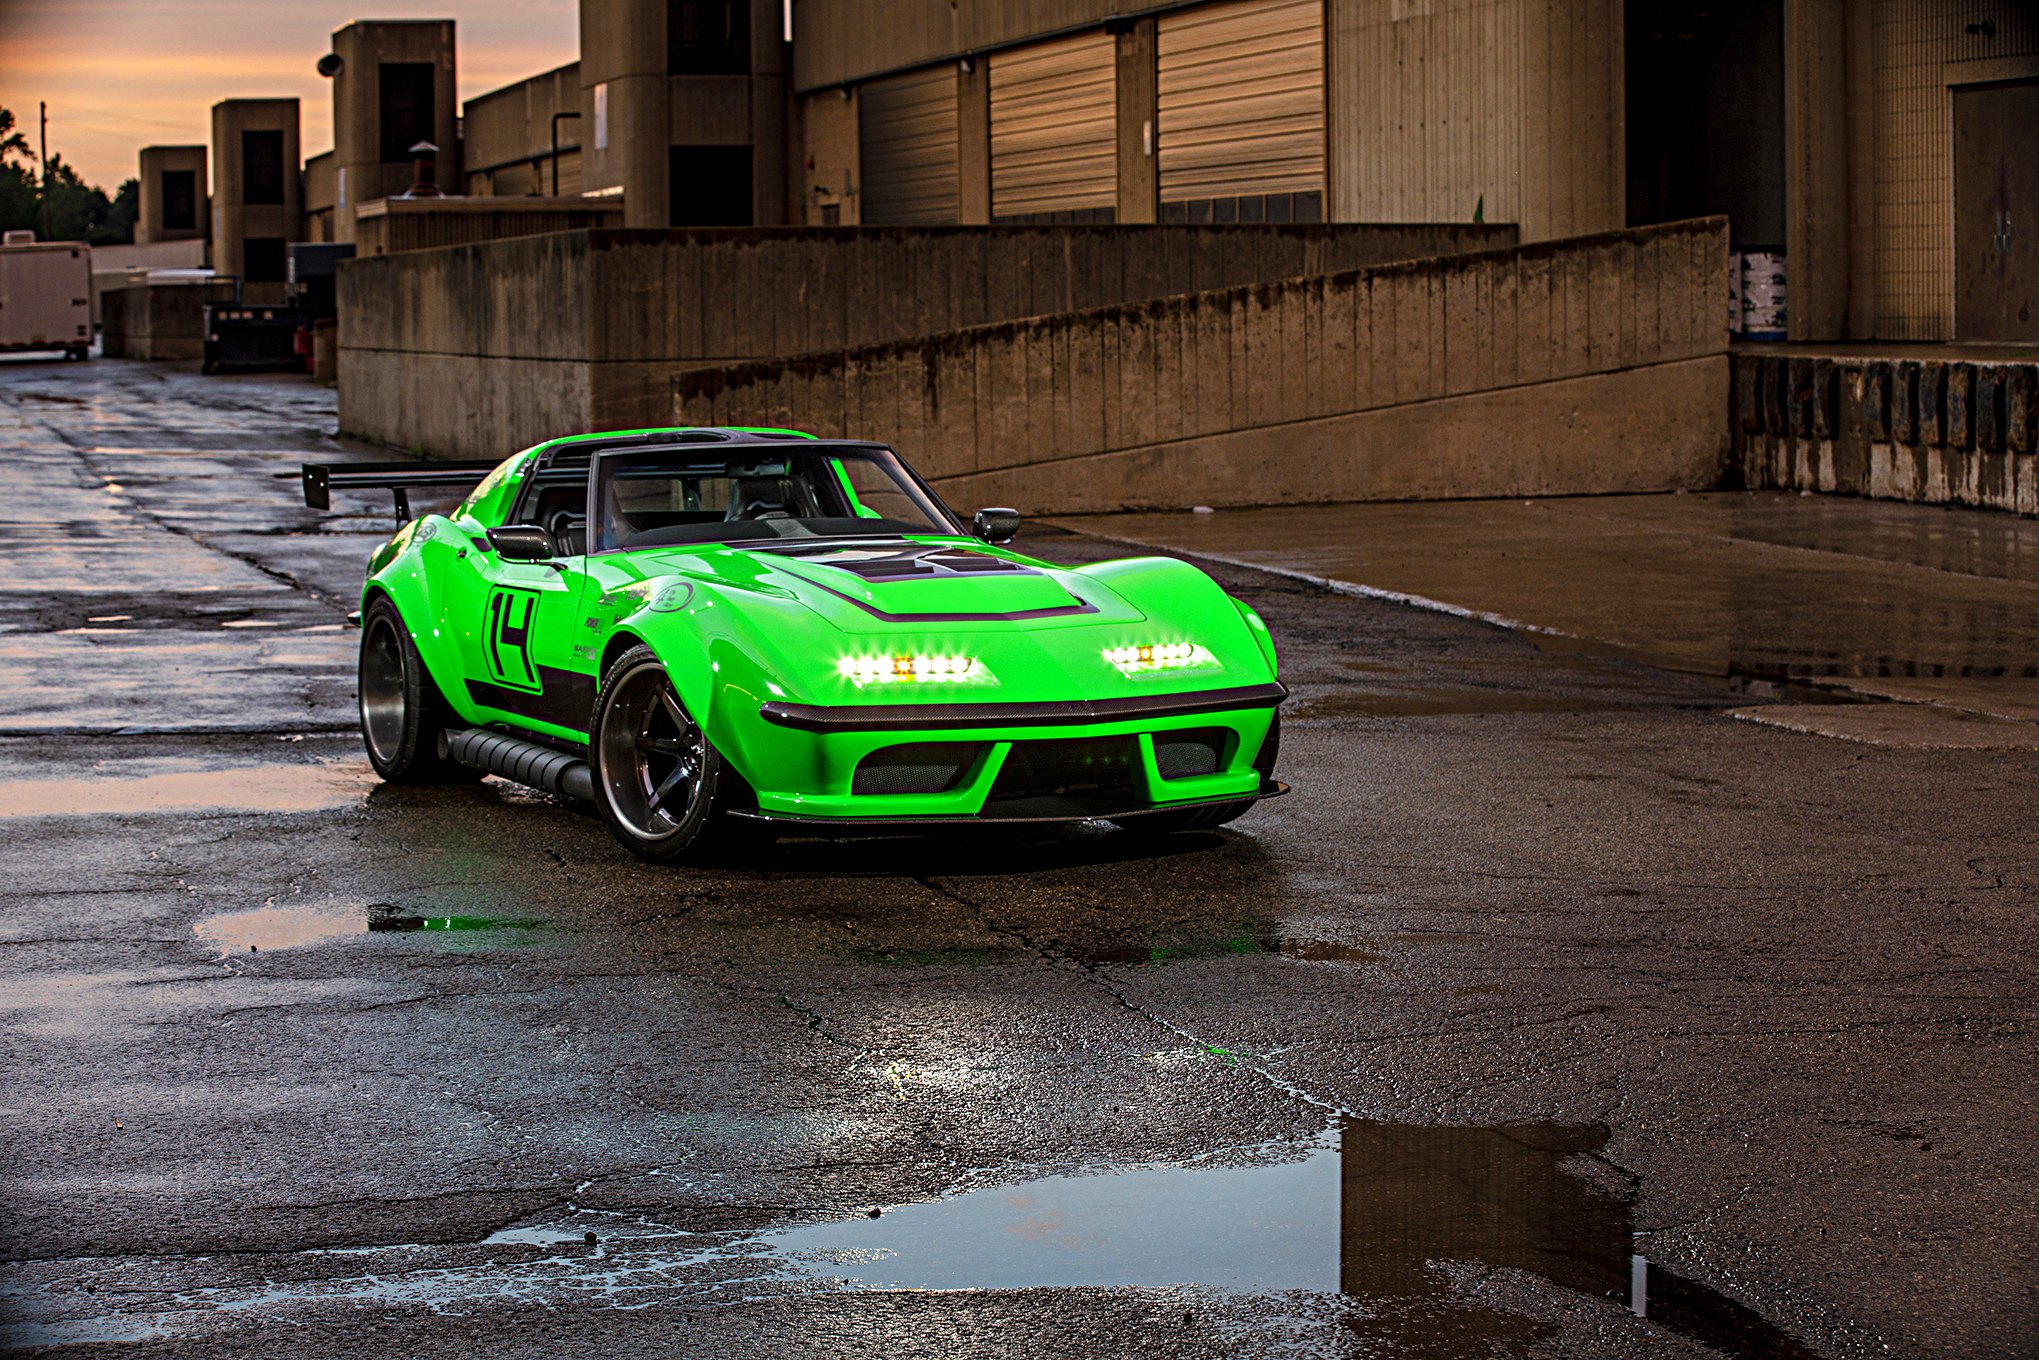 Green Debadged Chevy Corvette with Custom Wheels - Photo by Robert McGaffin